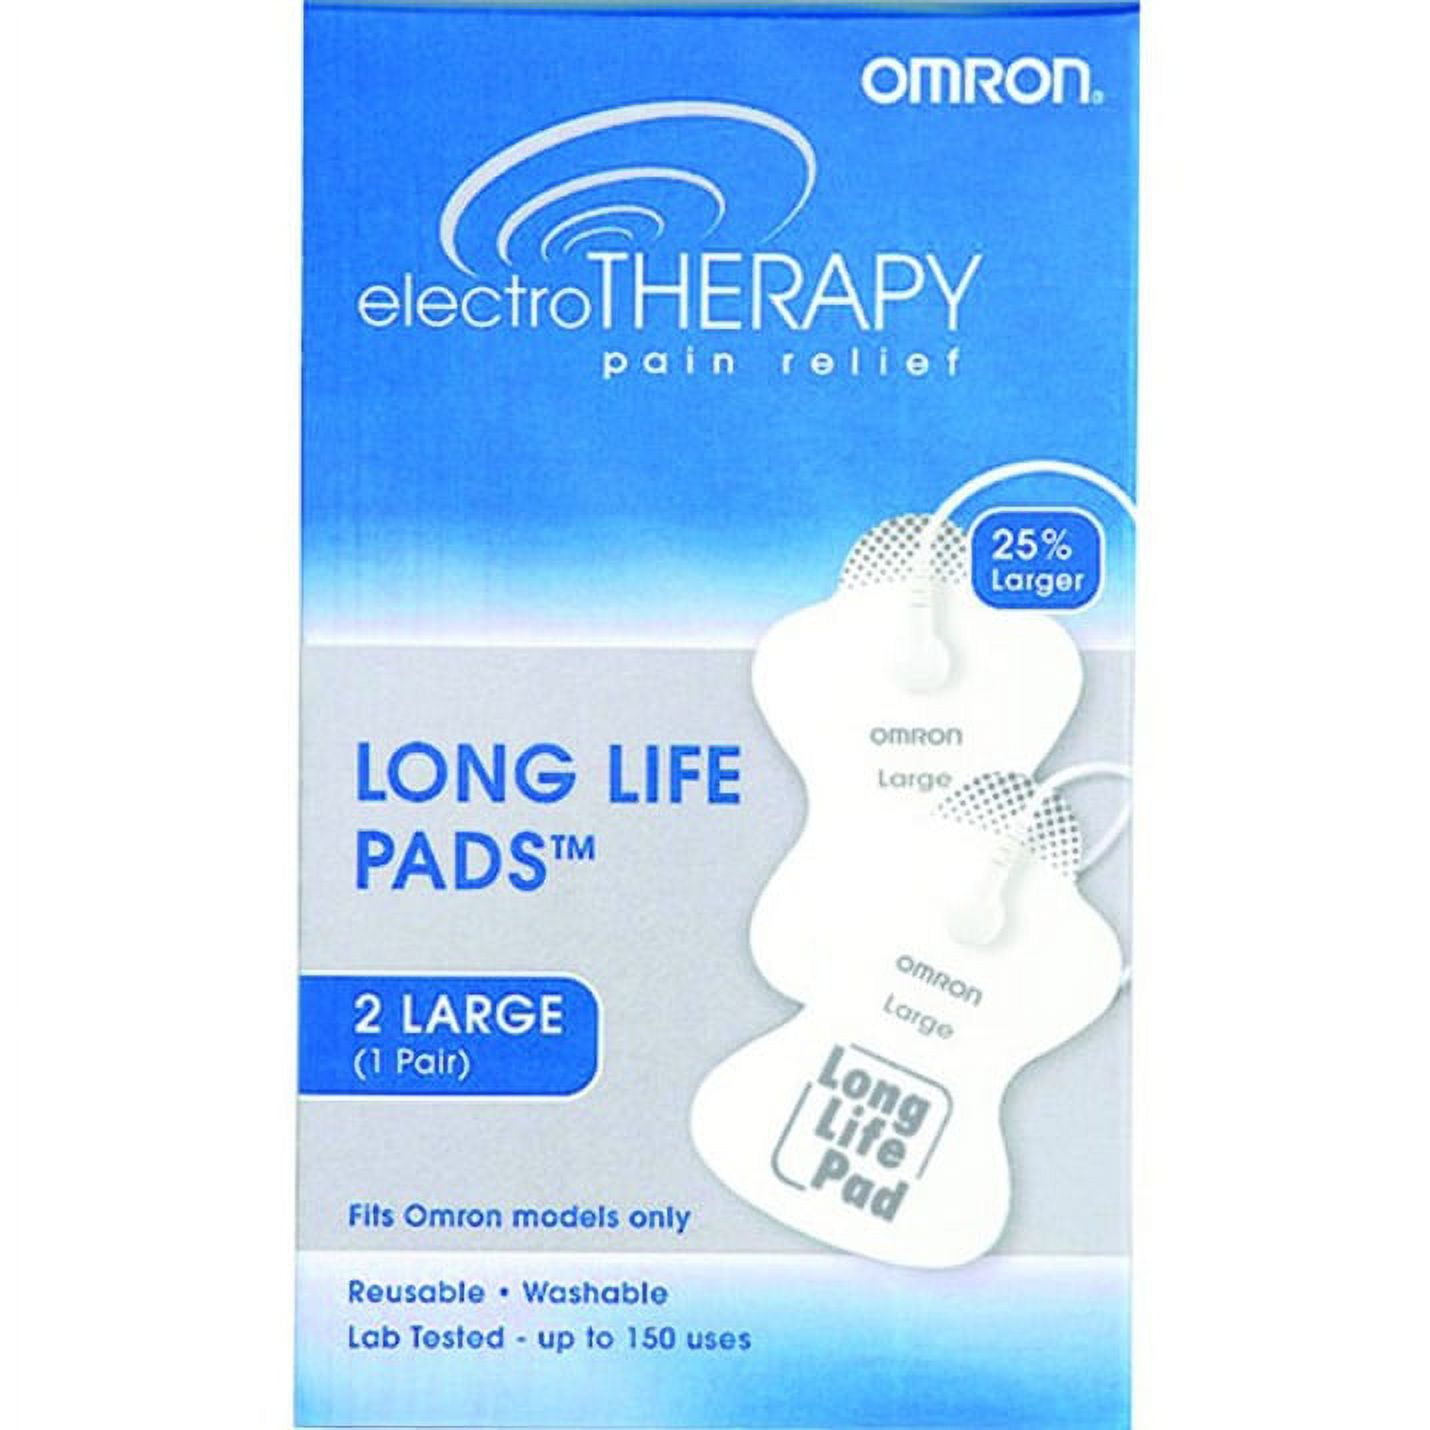 OMRON electroTHERAPY TENS Long Life Pads, Large, PMLLPAD-L 